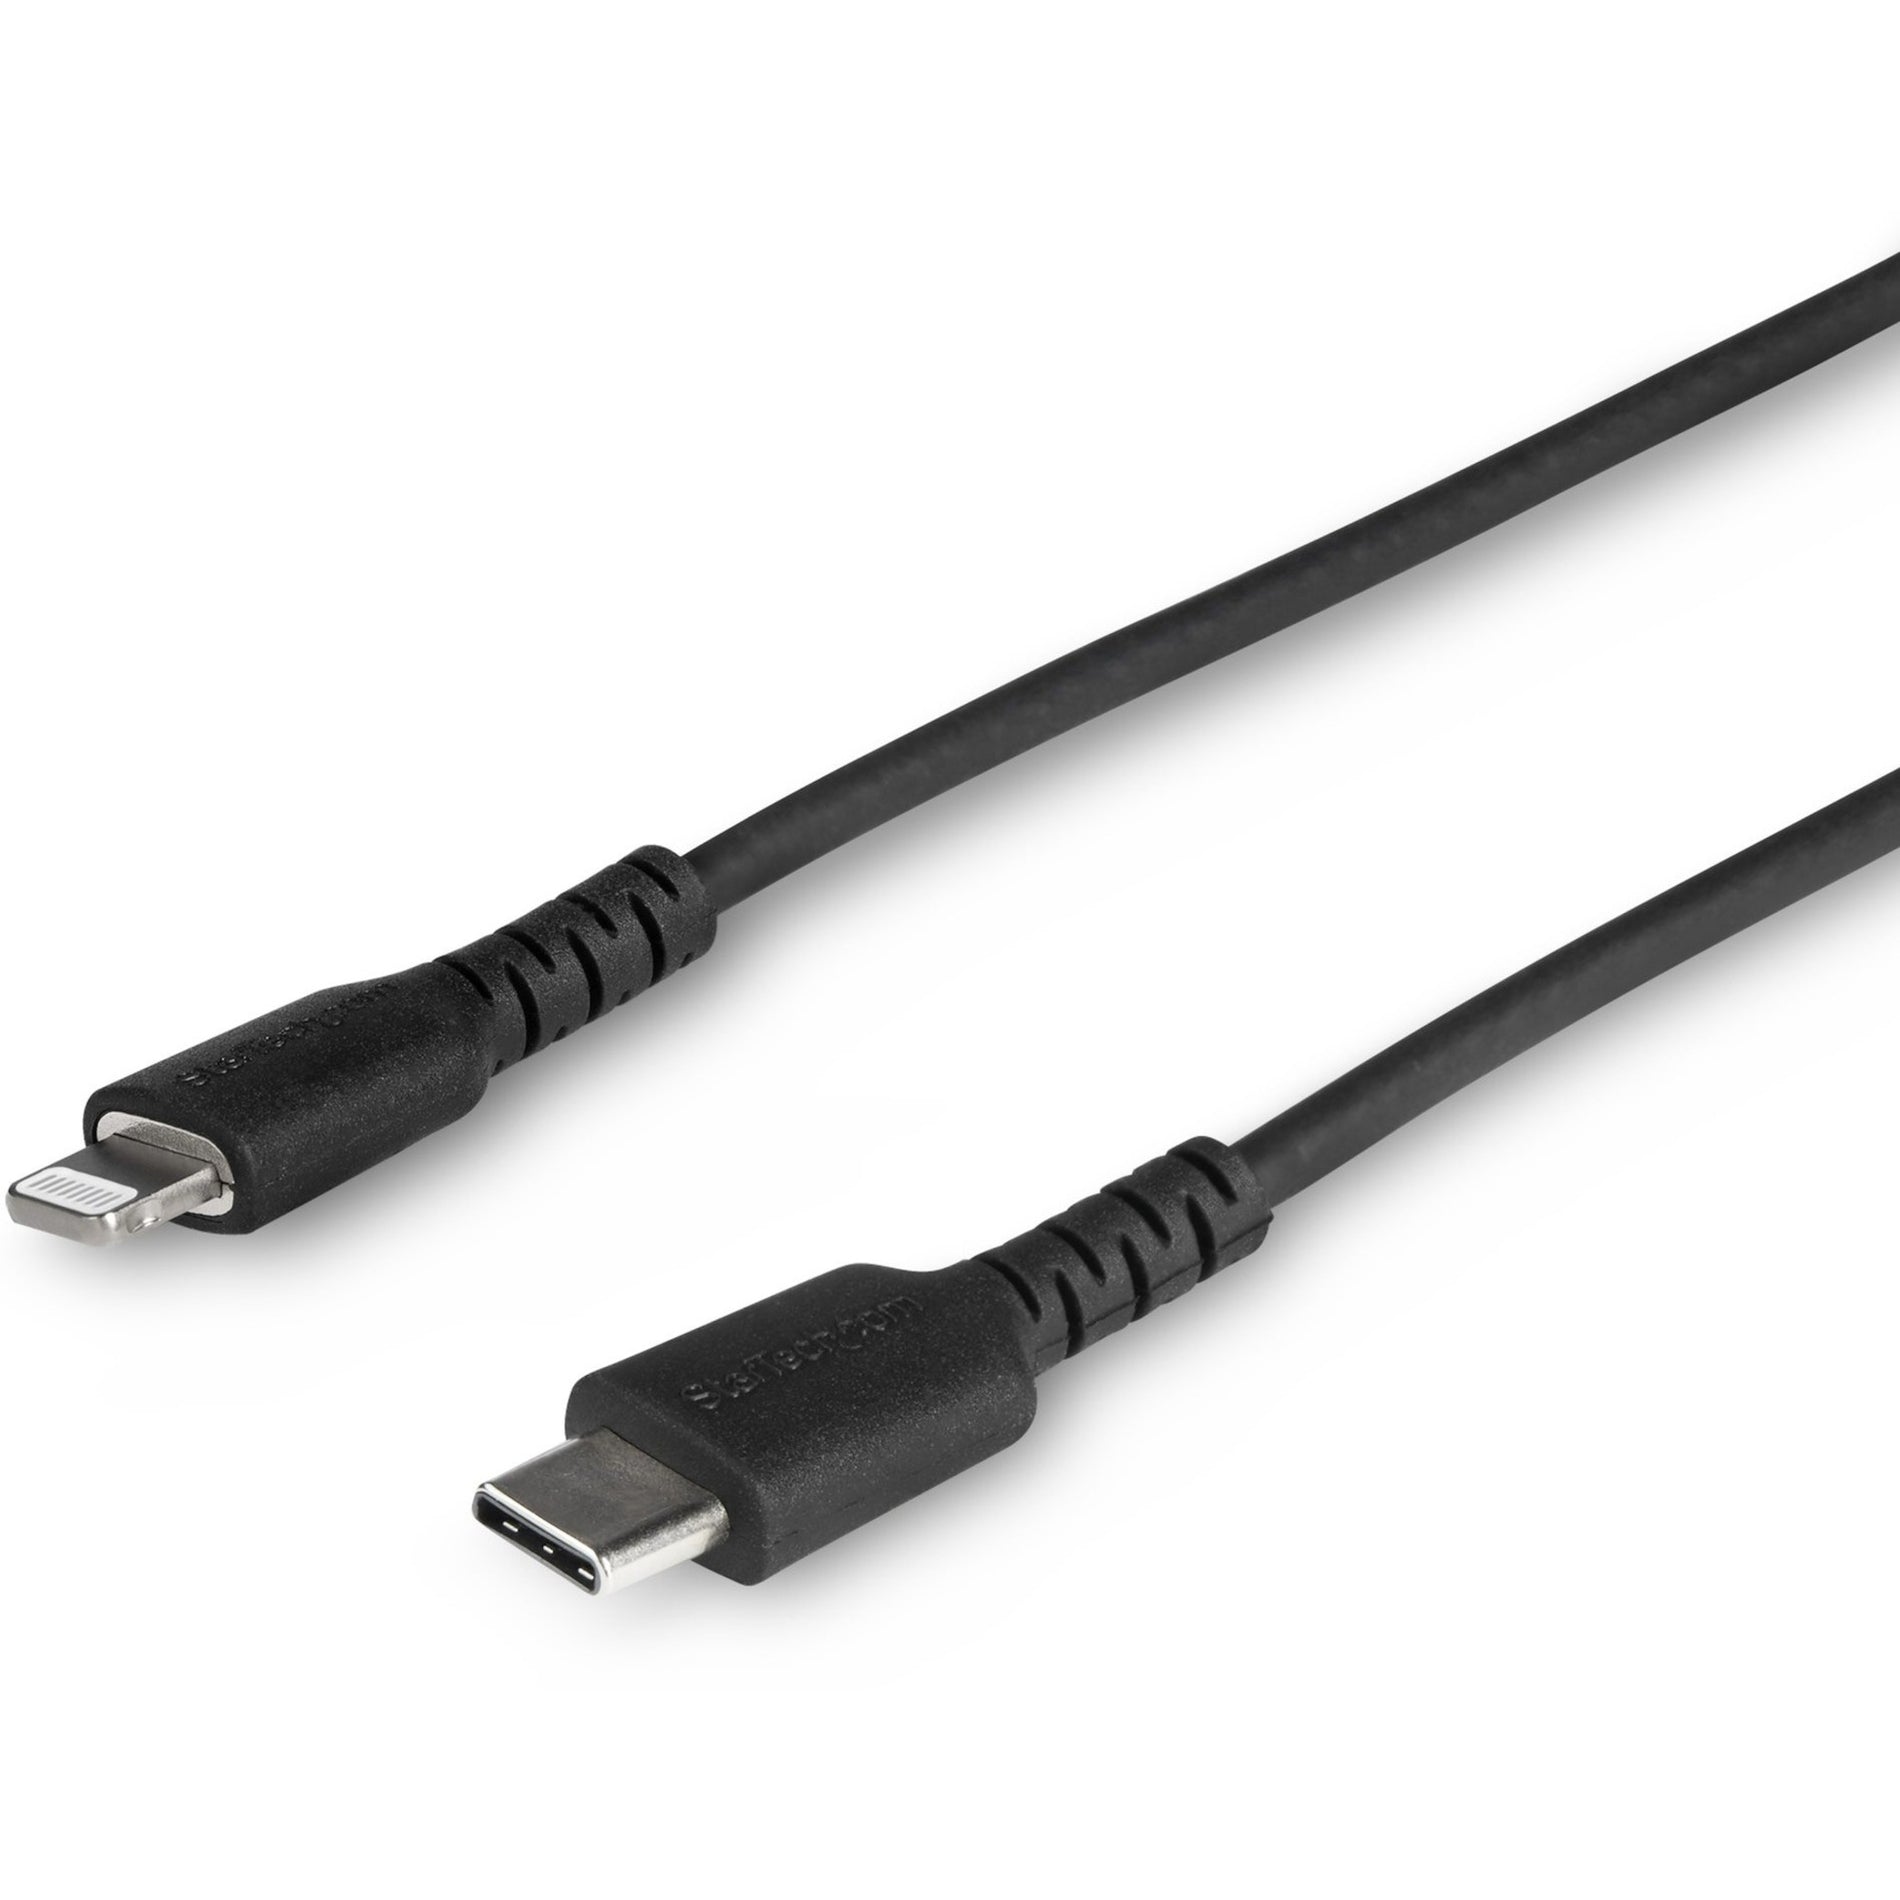 StarTech.com RUSBCLTMM1MB 1m/3.3ft USB C to Lightning Cable - MFi Certified, Heavy Duty Lightning Cable, Black, Durable USB Charging Cable